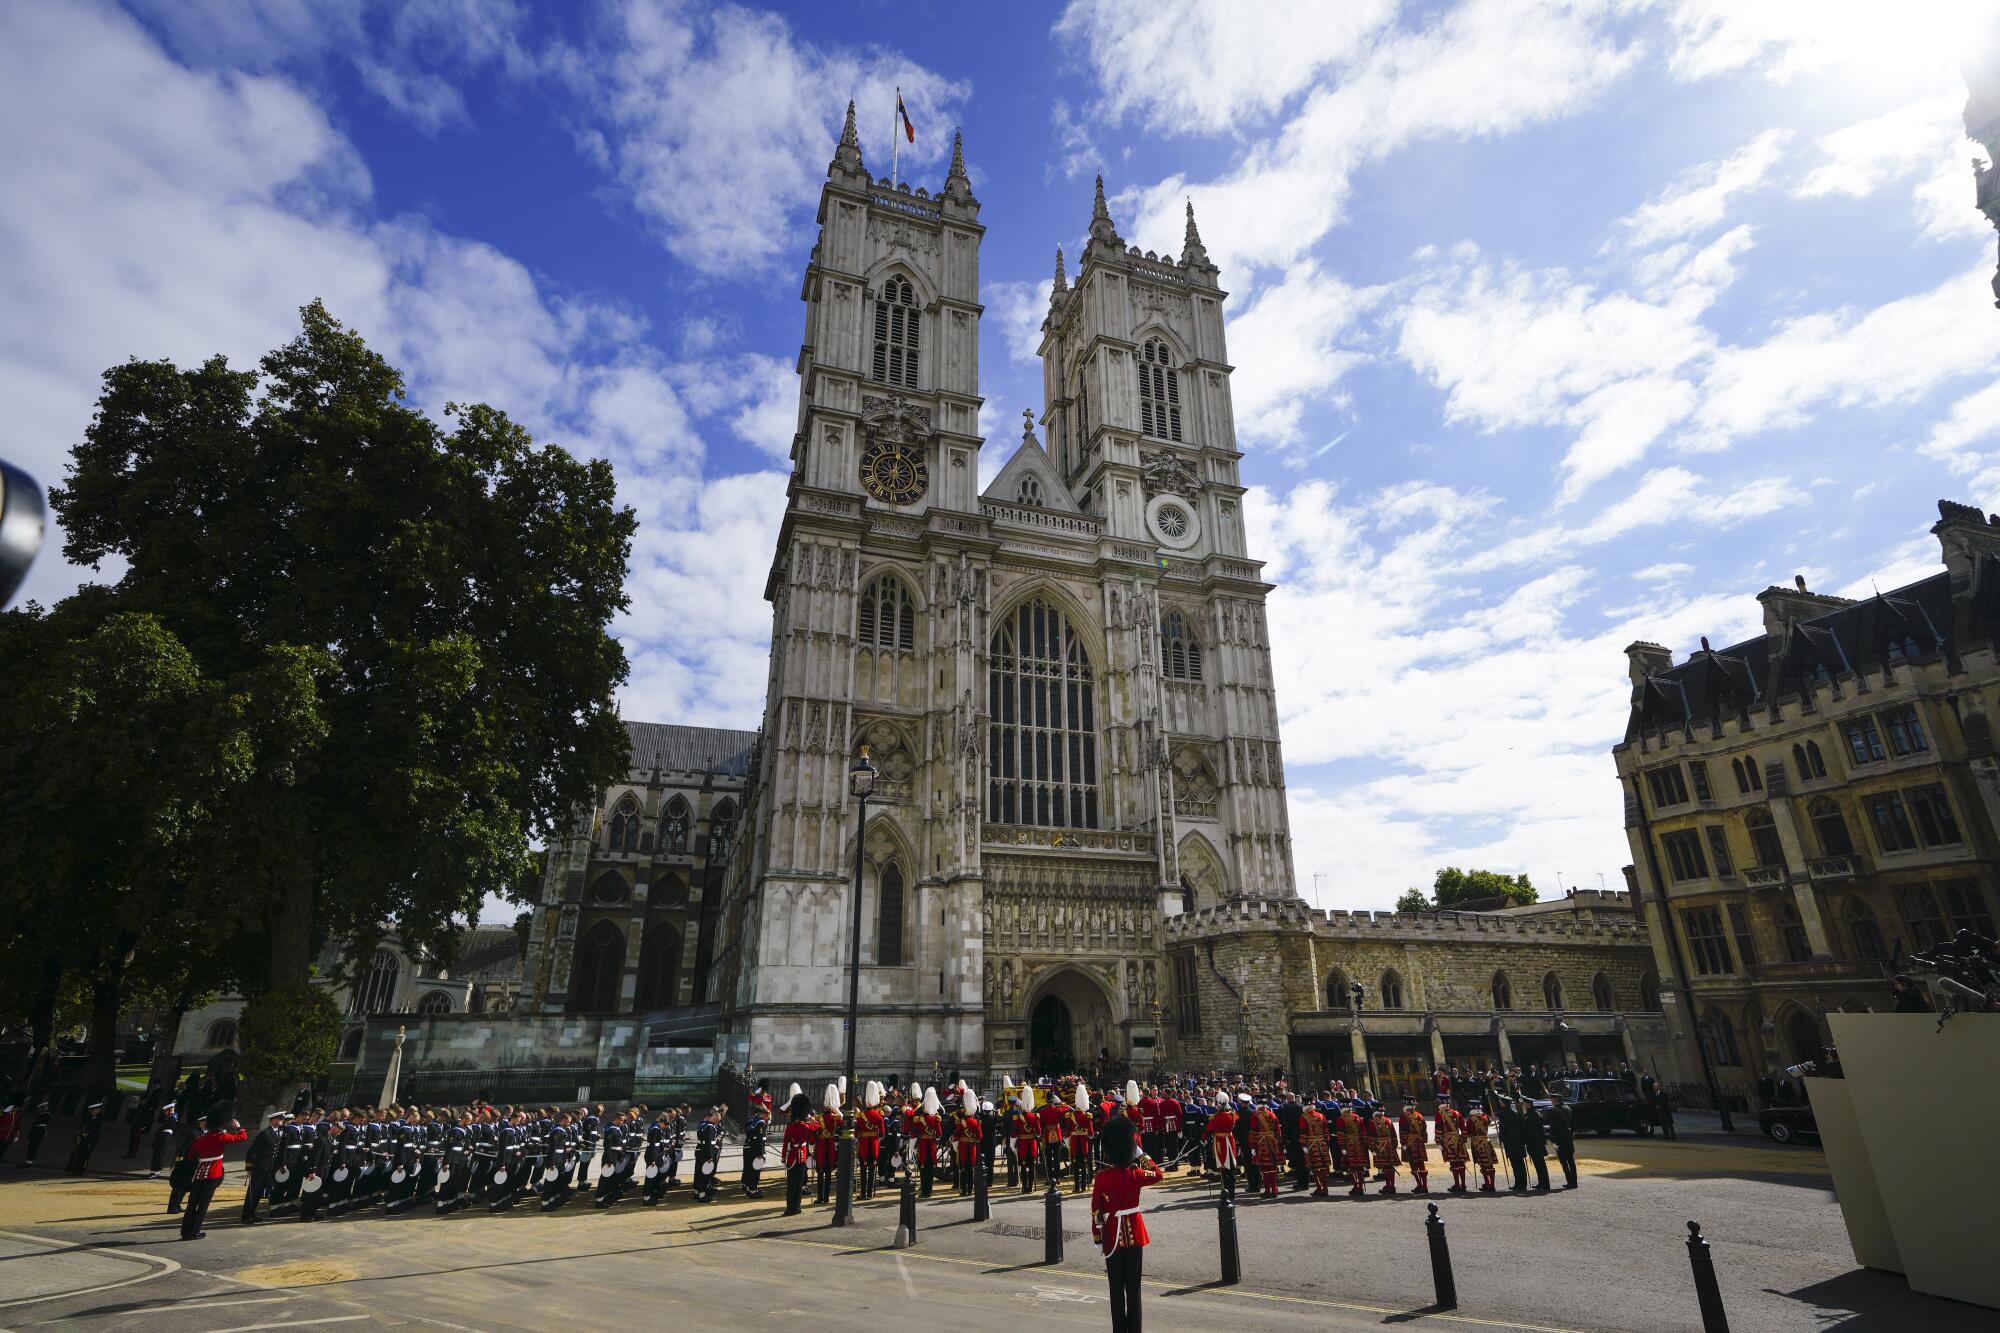 Troops and guards are amassed outside Westminster Abbey.